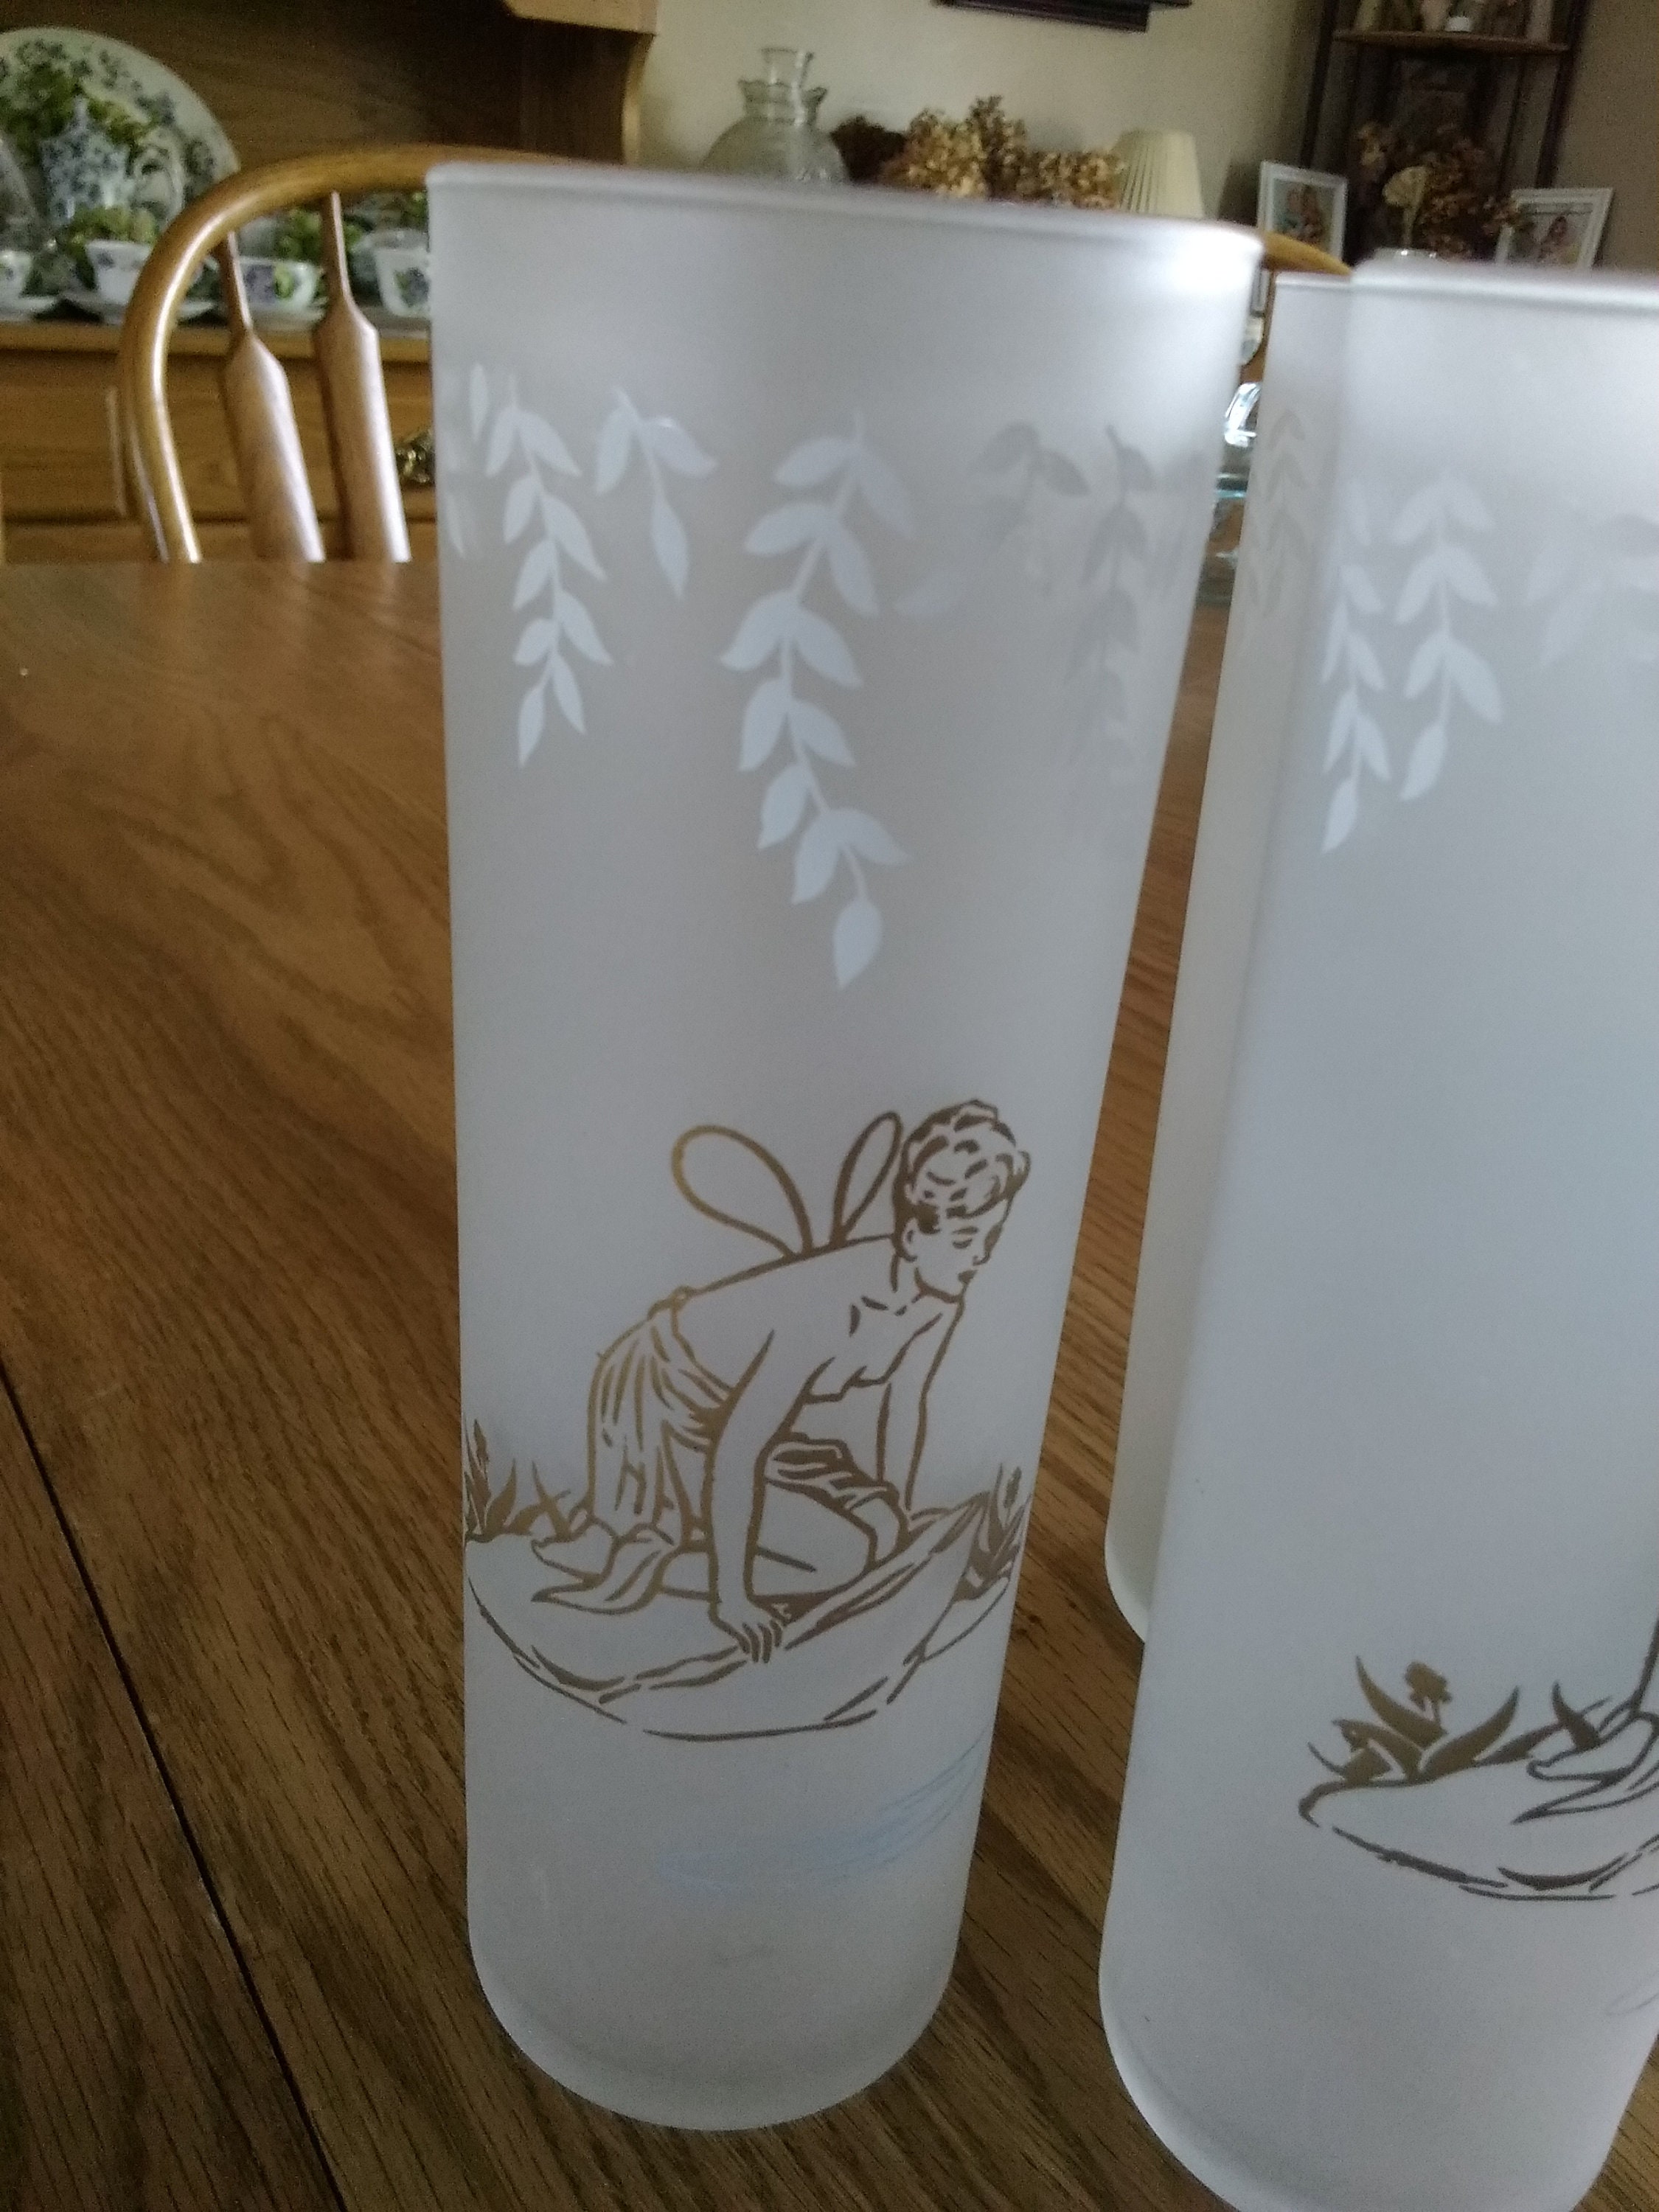 Set of 6 Federal Frosted Tom Collins Glasses Angel Fish Designs 7” Tall 15  fl oz